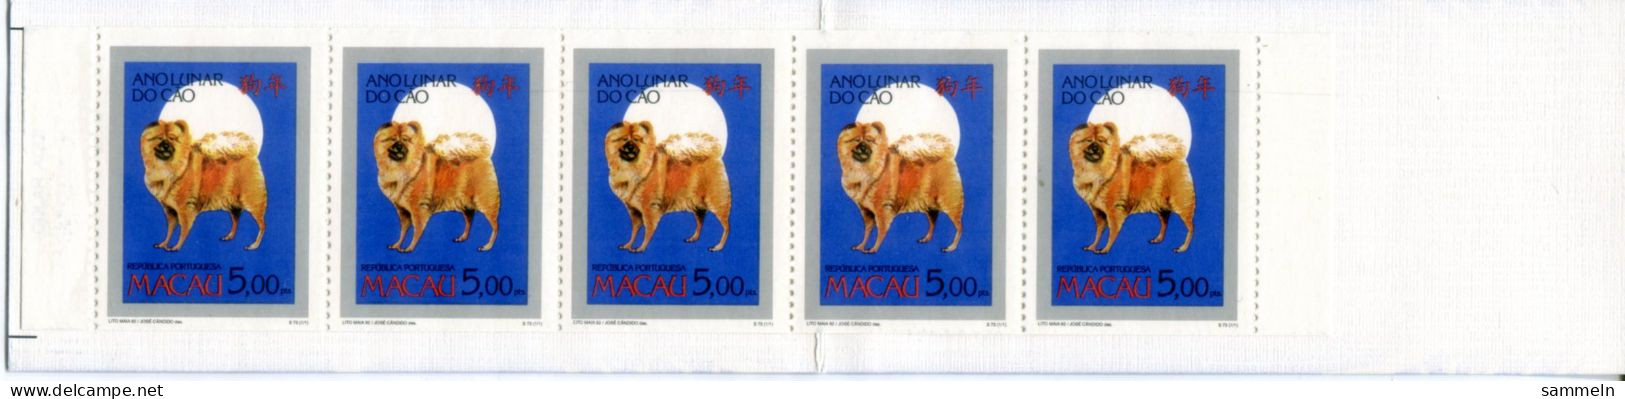 MACAO 746 C MH Mnh - Chinesisches Jahr Des Hundes, Chinese Year Of The Dog, Année Chinoise Du Chien - MACAU - Carnets